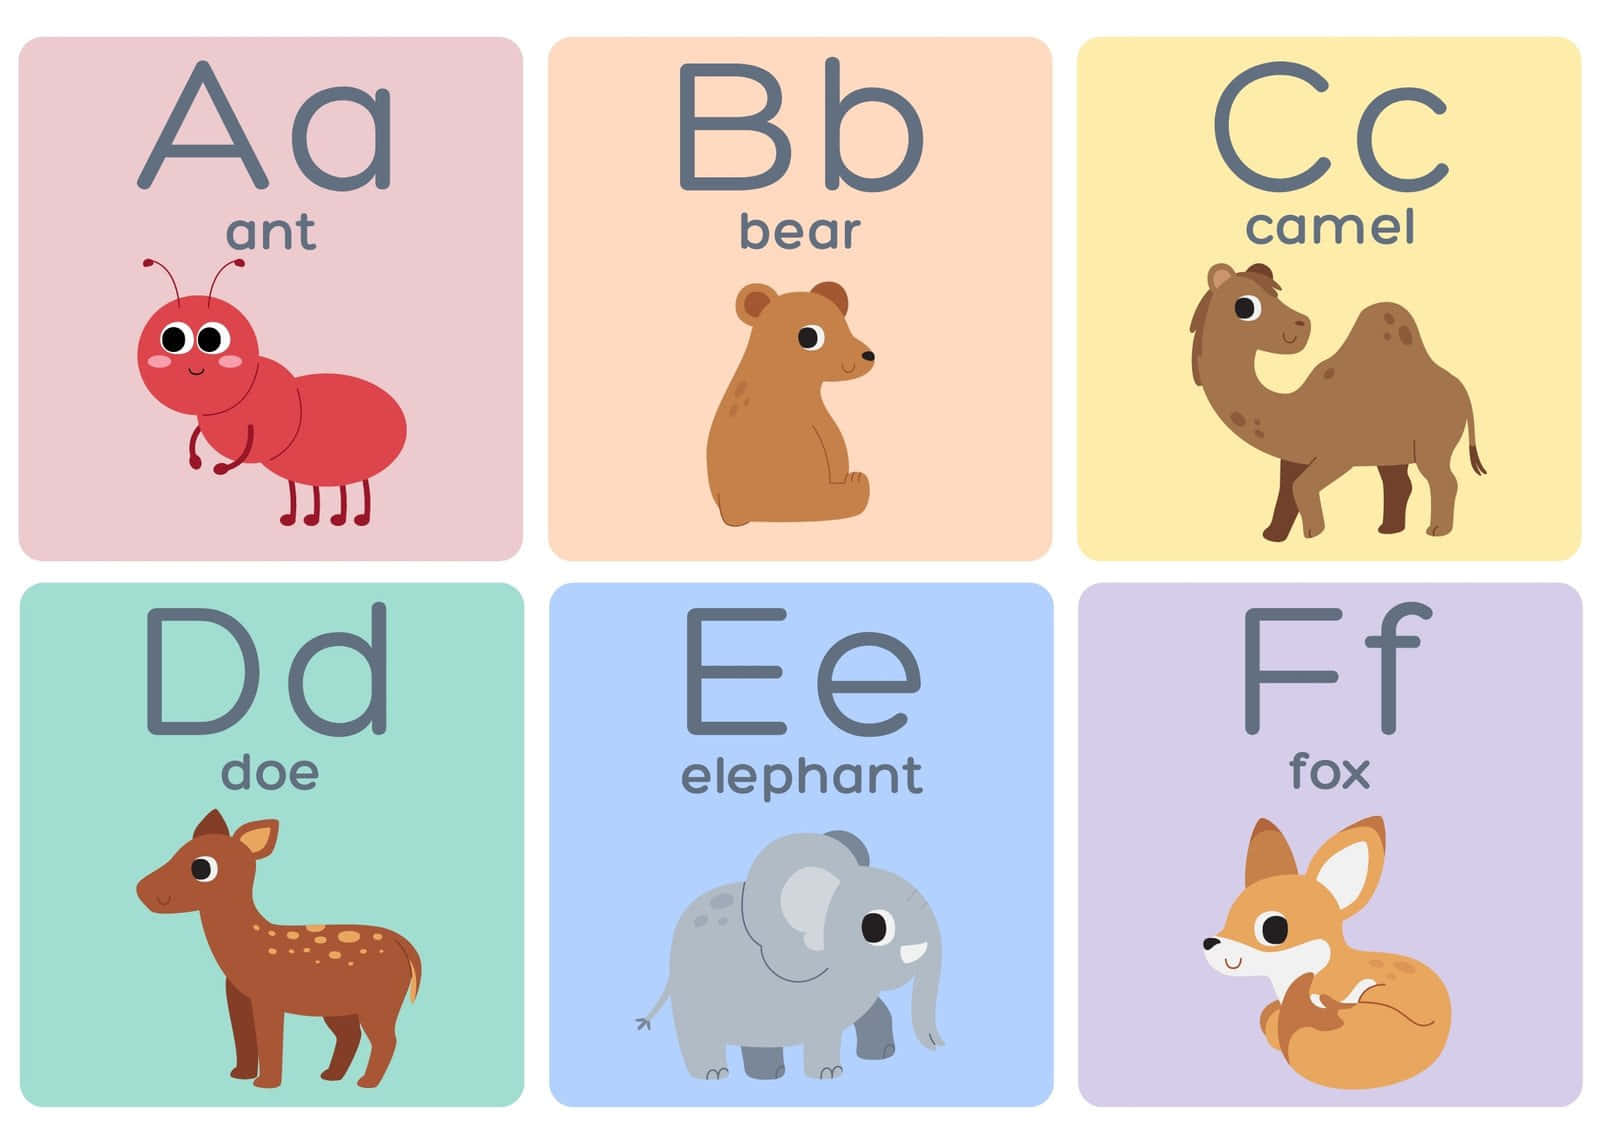 "Expanding Your Digital Horizons with Alphabet"